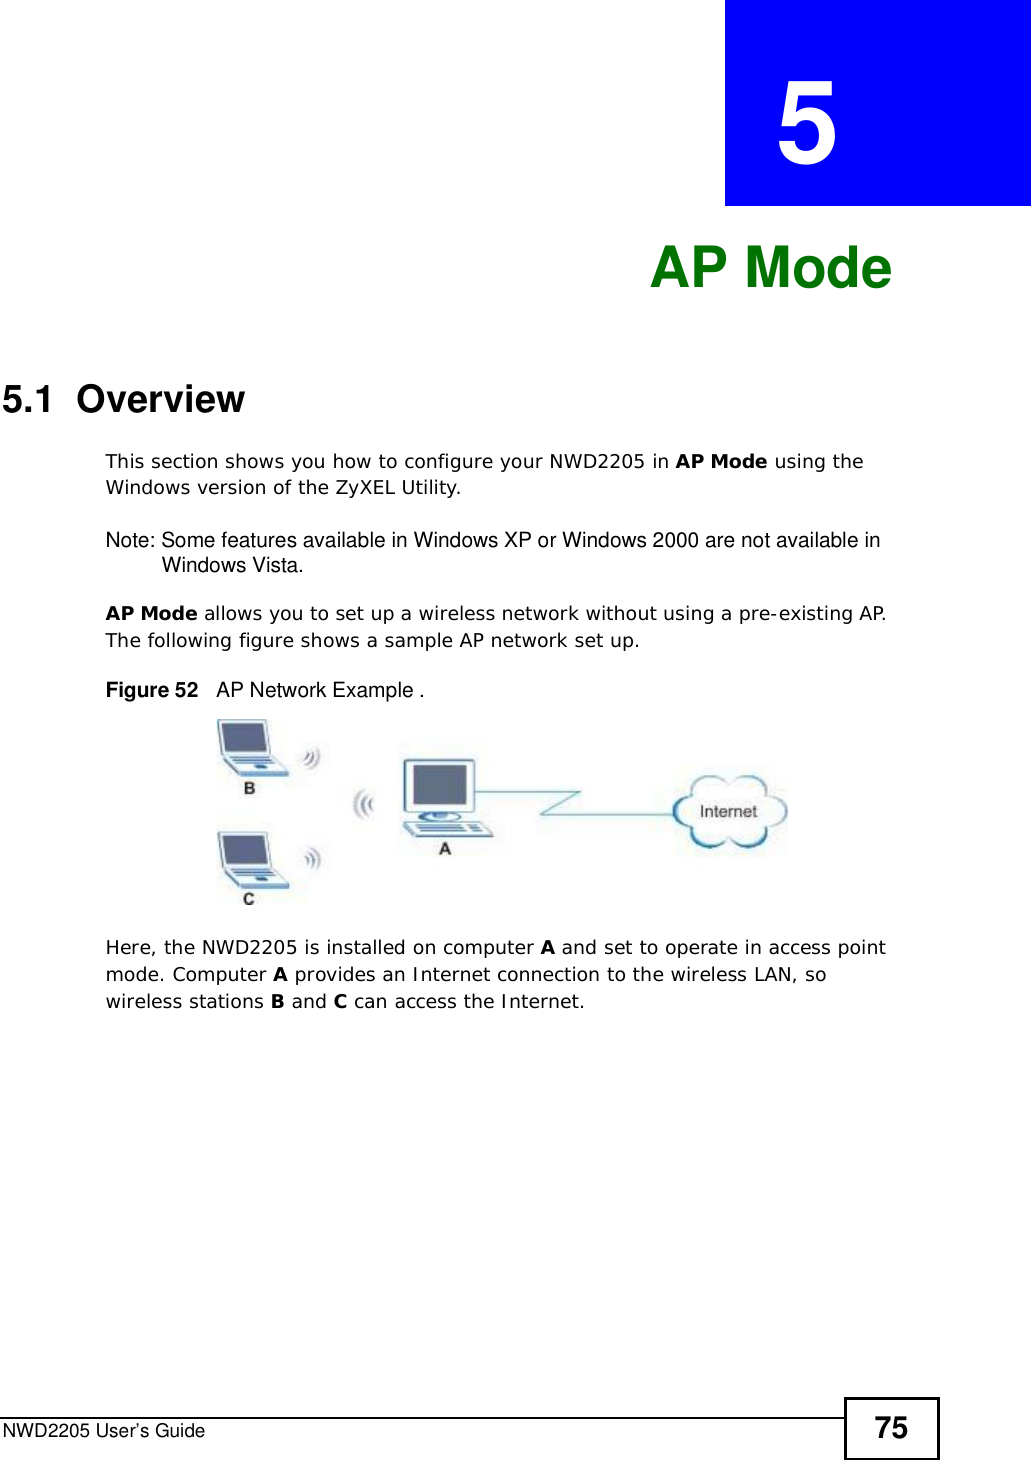 NWD2205 User’s Guide 75CHAPTER  5 AP Mode5.1  OverviewThis section shows you how to configure your NWD2205 in AP Mode using the Windows version of the ZyXEL Utility.Note: Some features available in Windows XP or Windows 2000 are not available in Windows Vista.AP Mode allows you to set up a wireless network without using a pre-existing AP. The following figure shows a sample AP network set up.Figure 52   AP Network Example .Here, the NWD2205 is installed on computer A and set to operate in access point mode. Computer A provides an Internet connection to the wireless LAN, so wireless stations B and C can access the Internet.